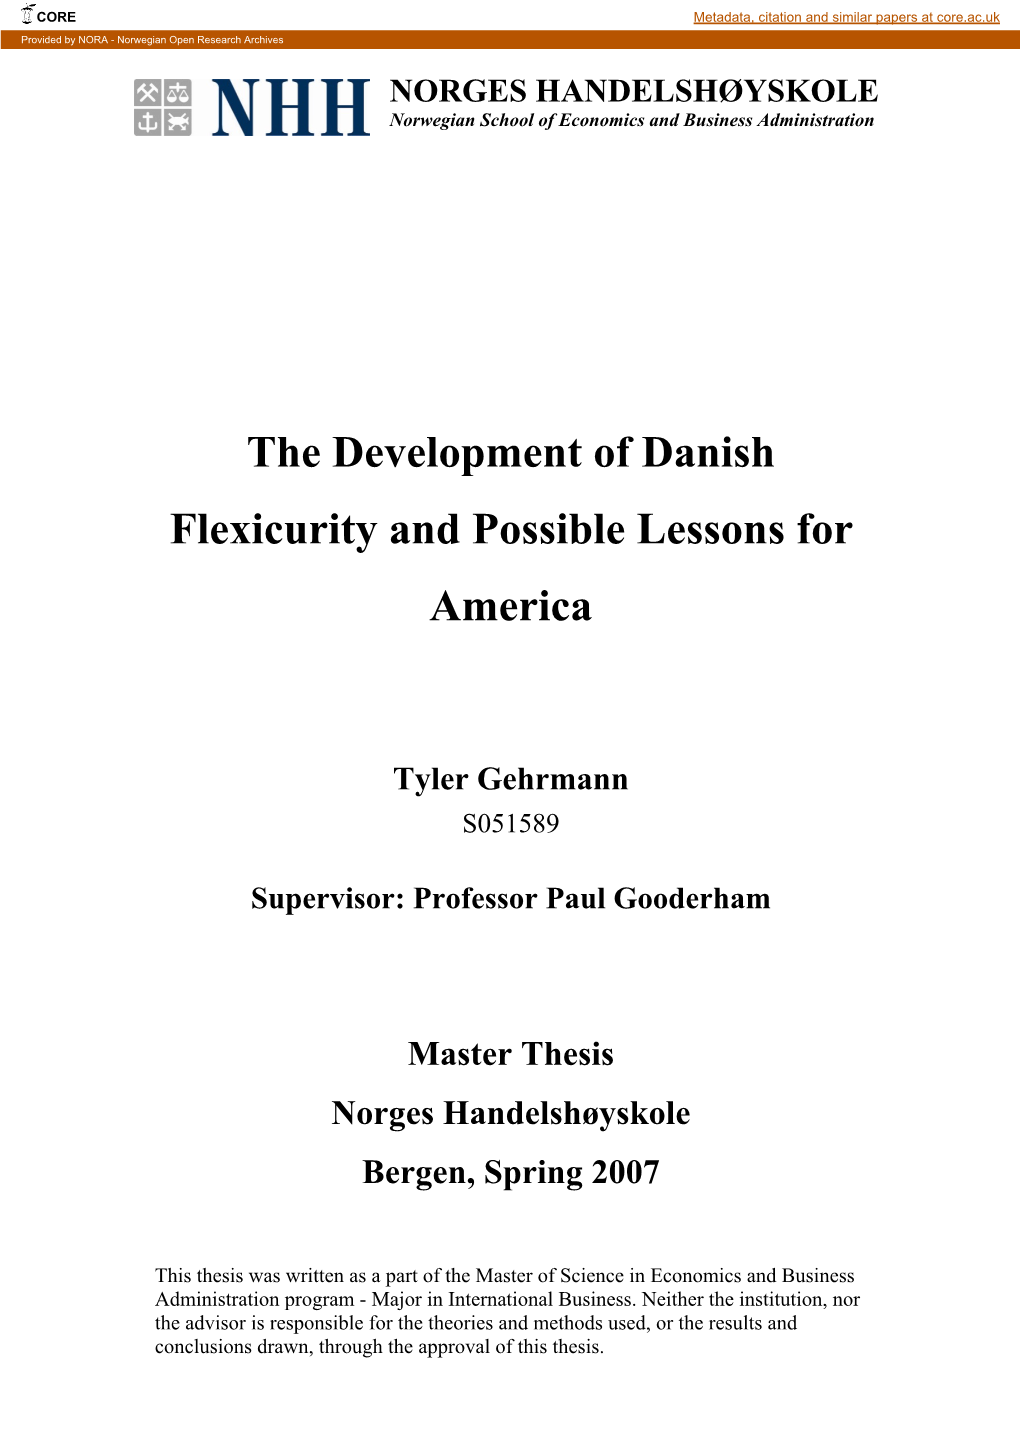 The Development of Danish Flexicurity and Possible Lessons for America